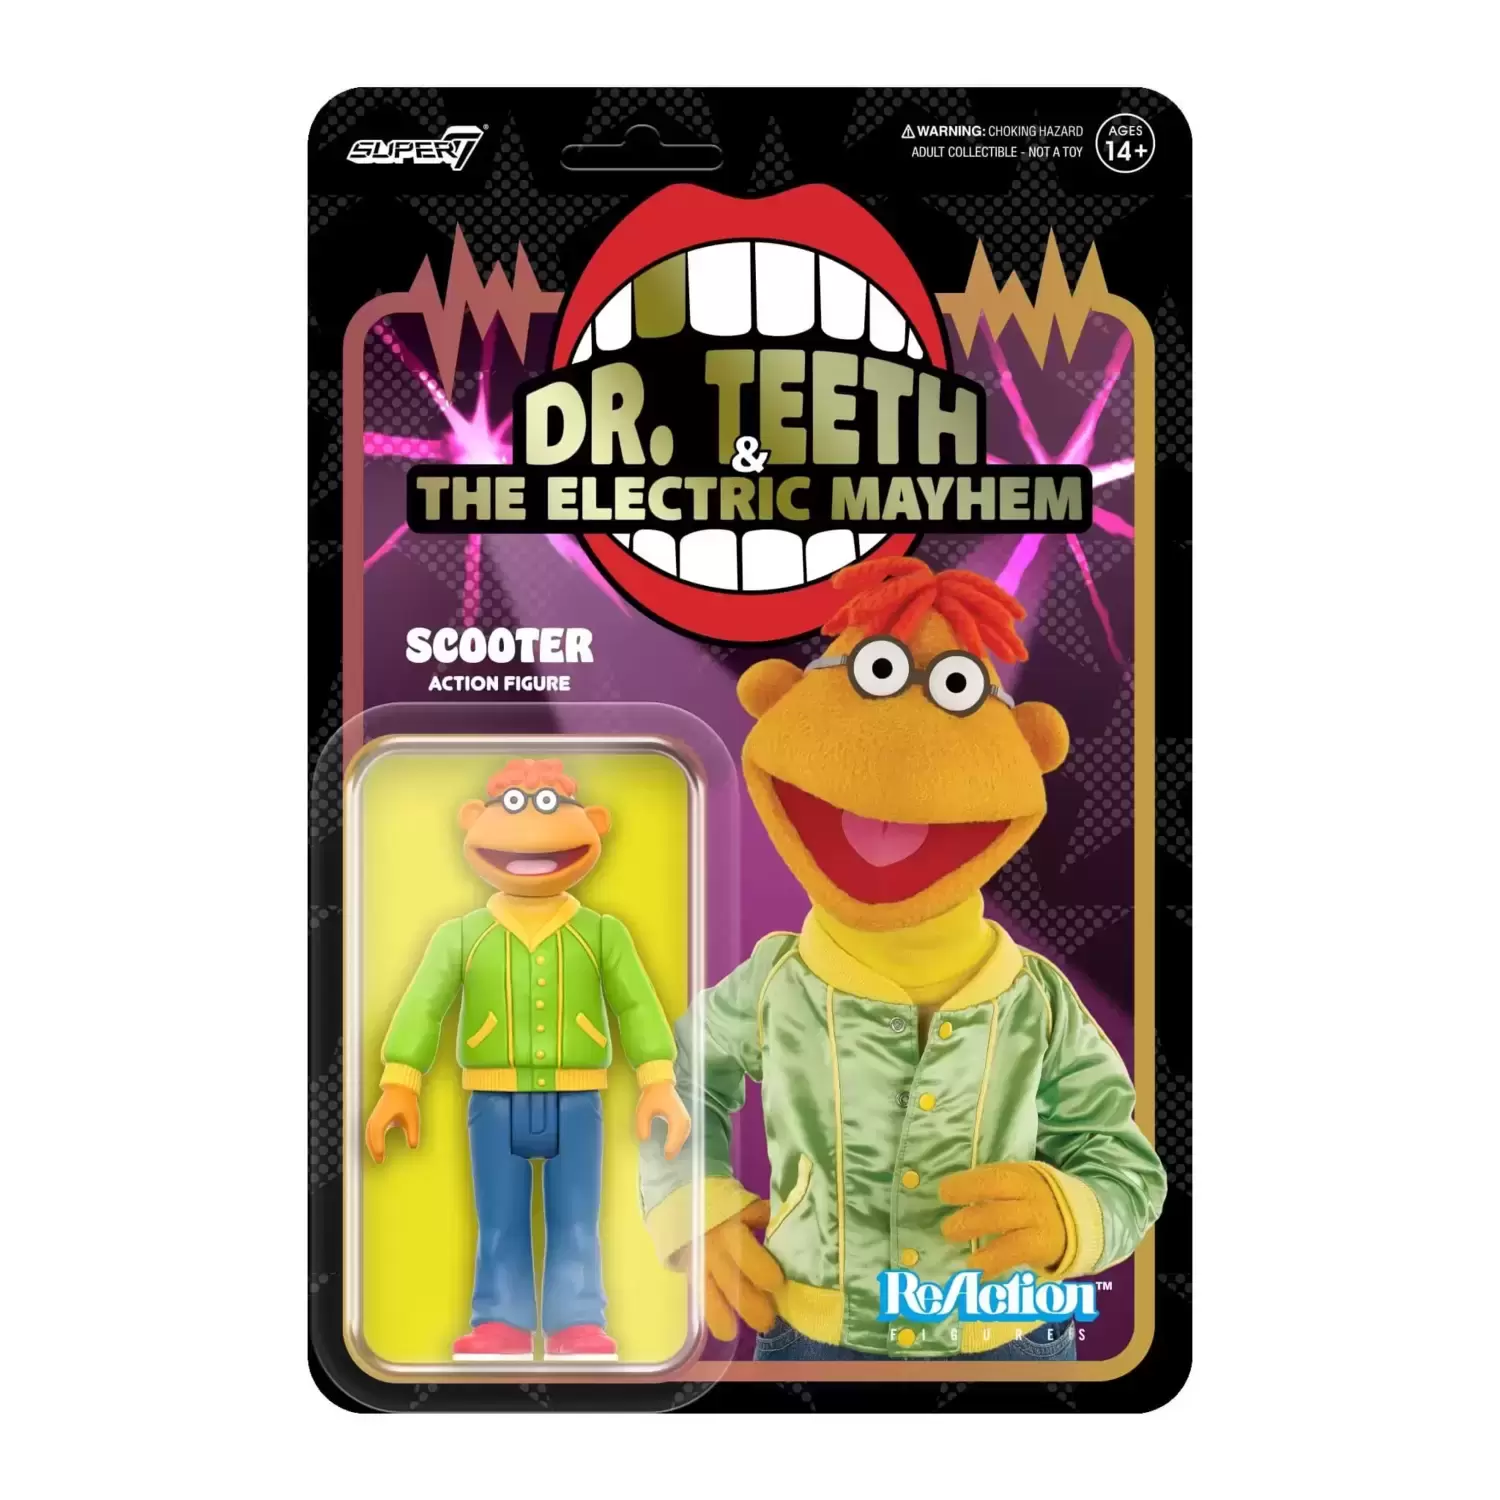 ReAction Figures - The Muppets (Dr. Teeth & The Electric Mayhem) - Scooter